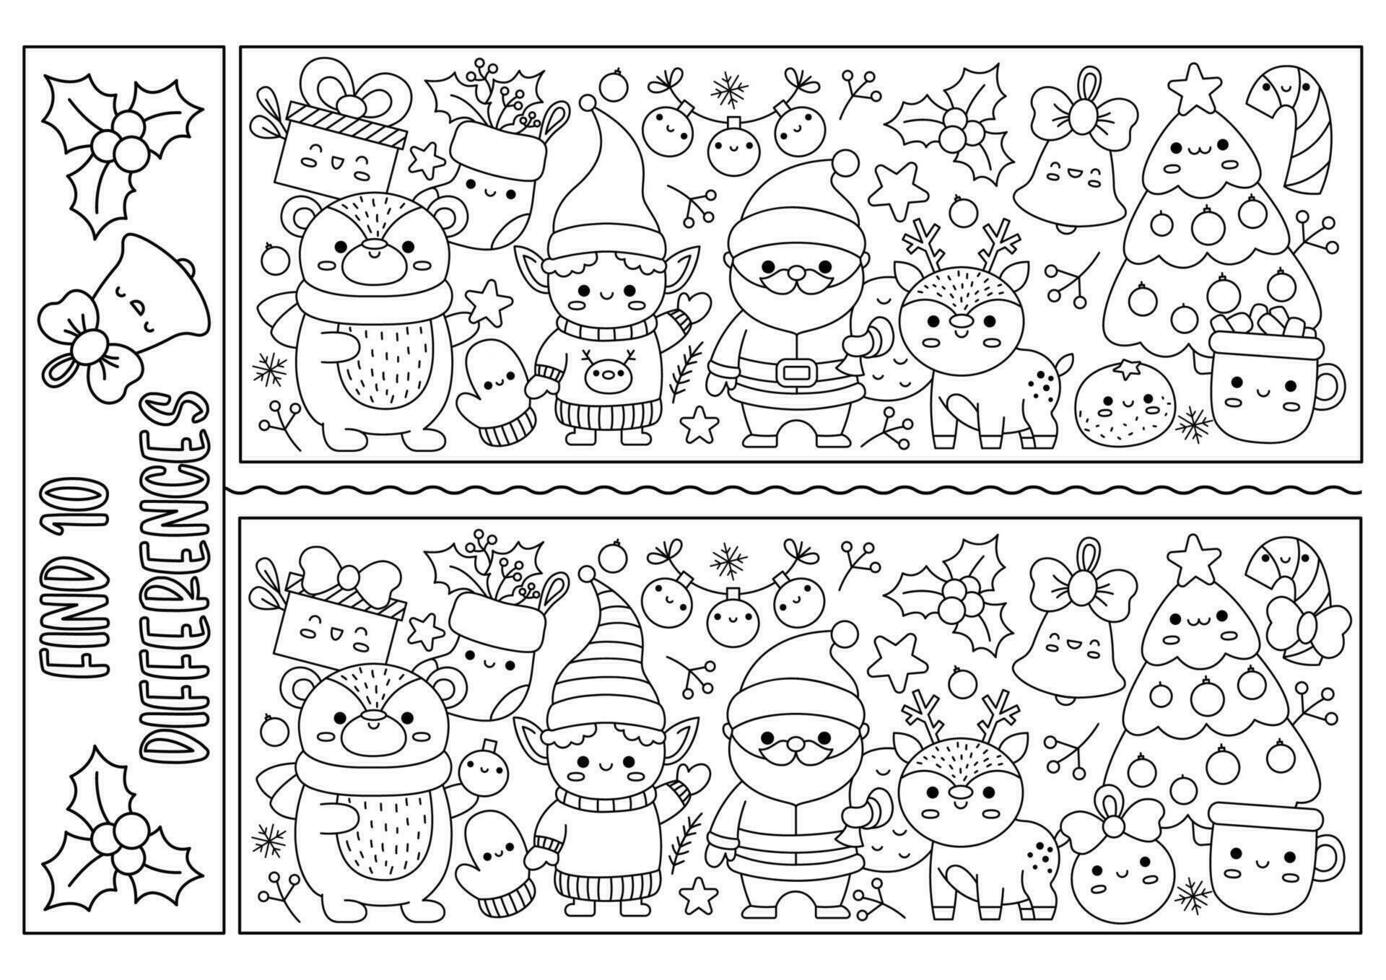 Christmas black and white find differences game for children. Attention skills activity with cute Santa Claus, deer, tree, animals and winter symbols. New Year line puzzle or coloring page for kids vector